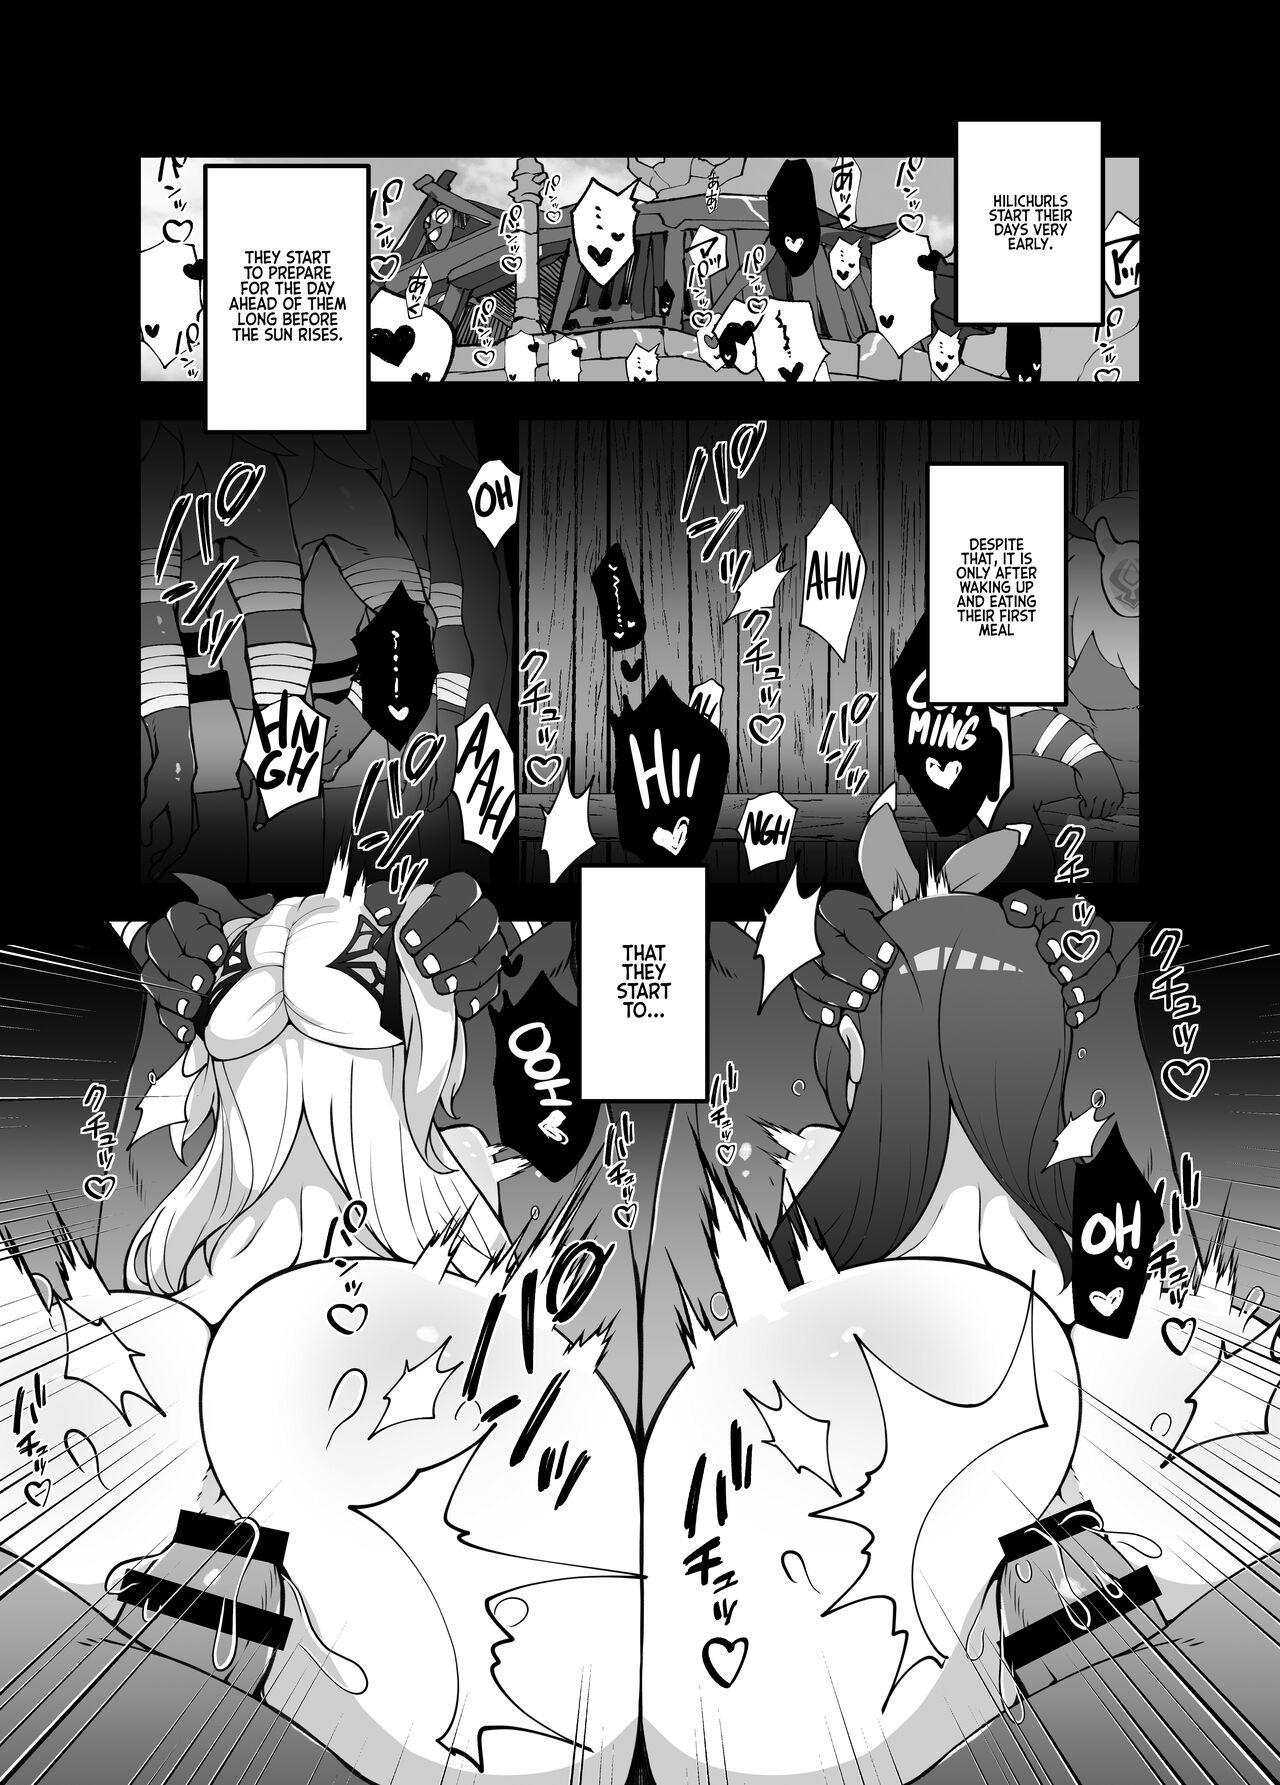 Free Hardcore Porn [Karouke (Karou)] The Attack of the Hilichurls II ~The Invasion's Prelude~ Noelle,Chivalric Blossom that withered~ (Genshin Impact) [English] [Kyuume] [Digital] - Genshin impact Ejaculation - Page 3